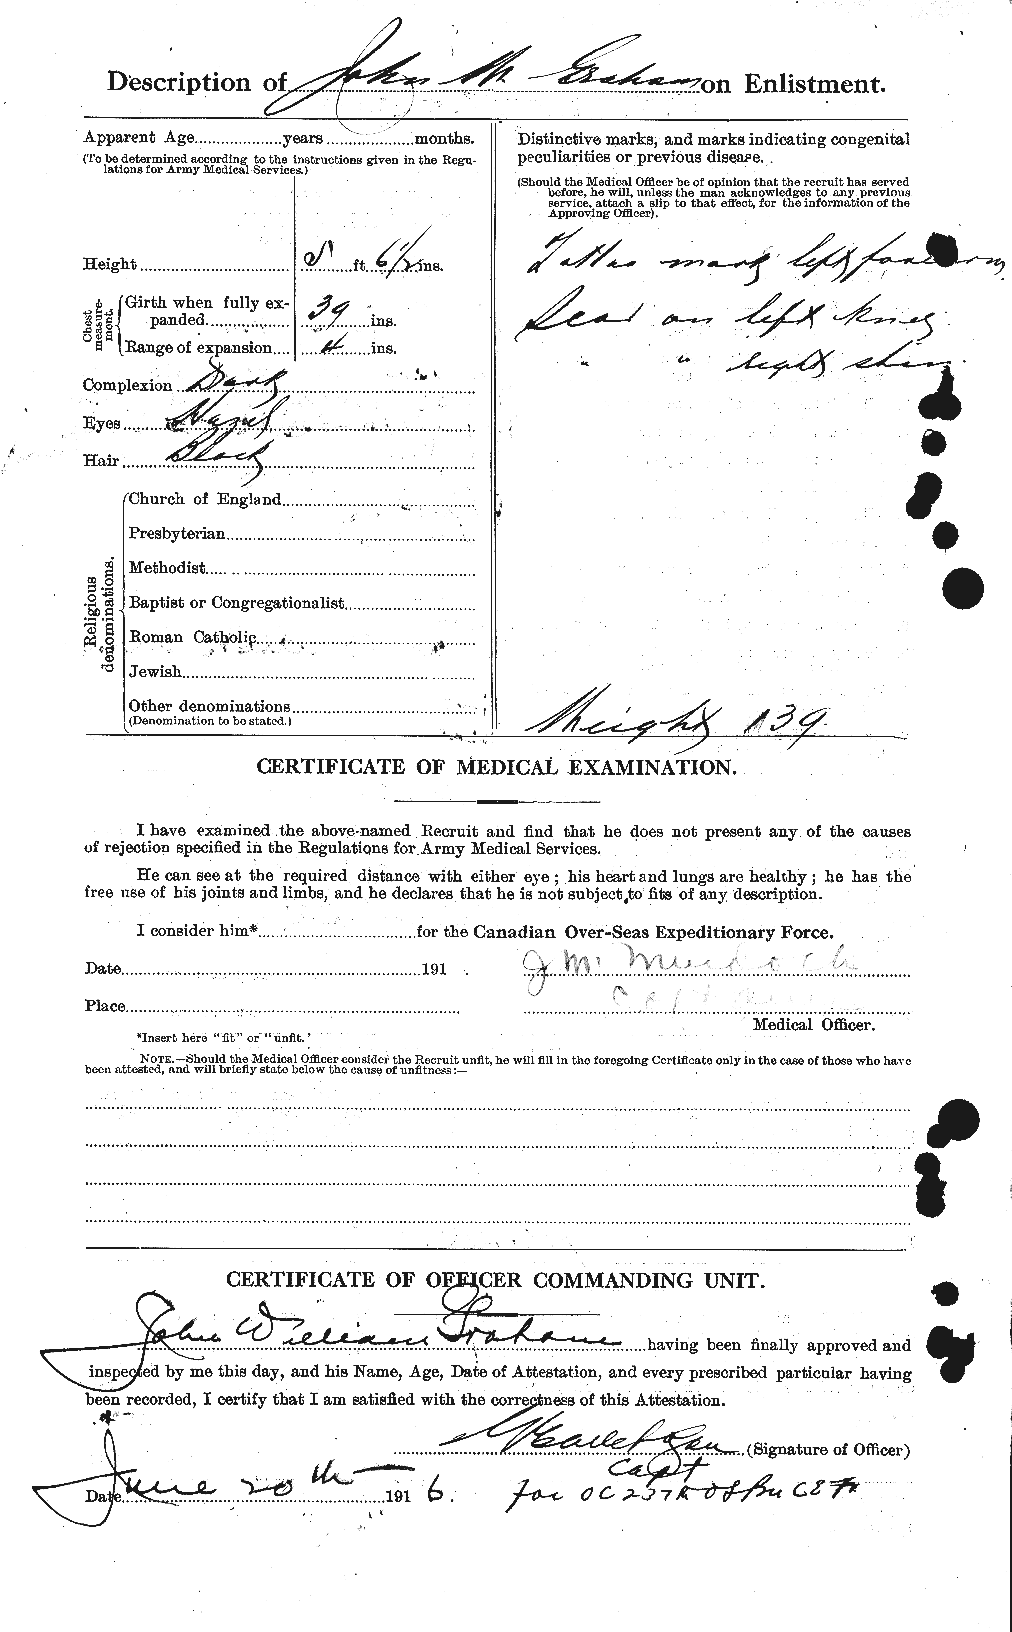 Personnel Records of the First World War - CEF 359219b